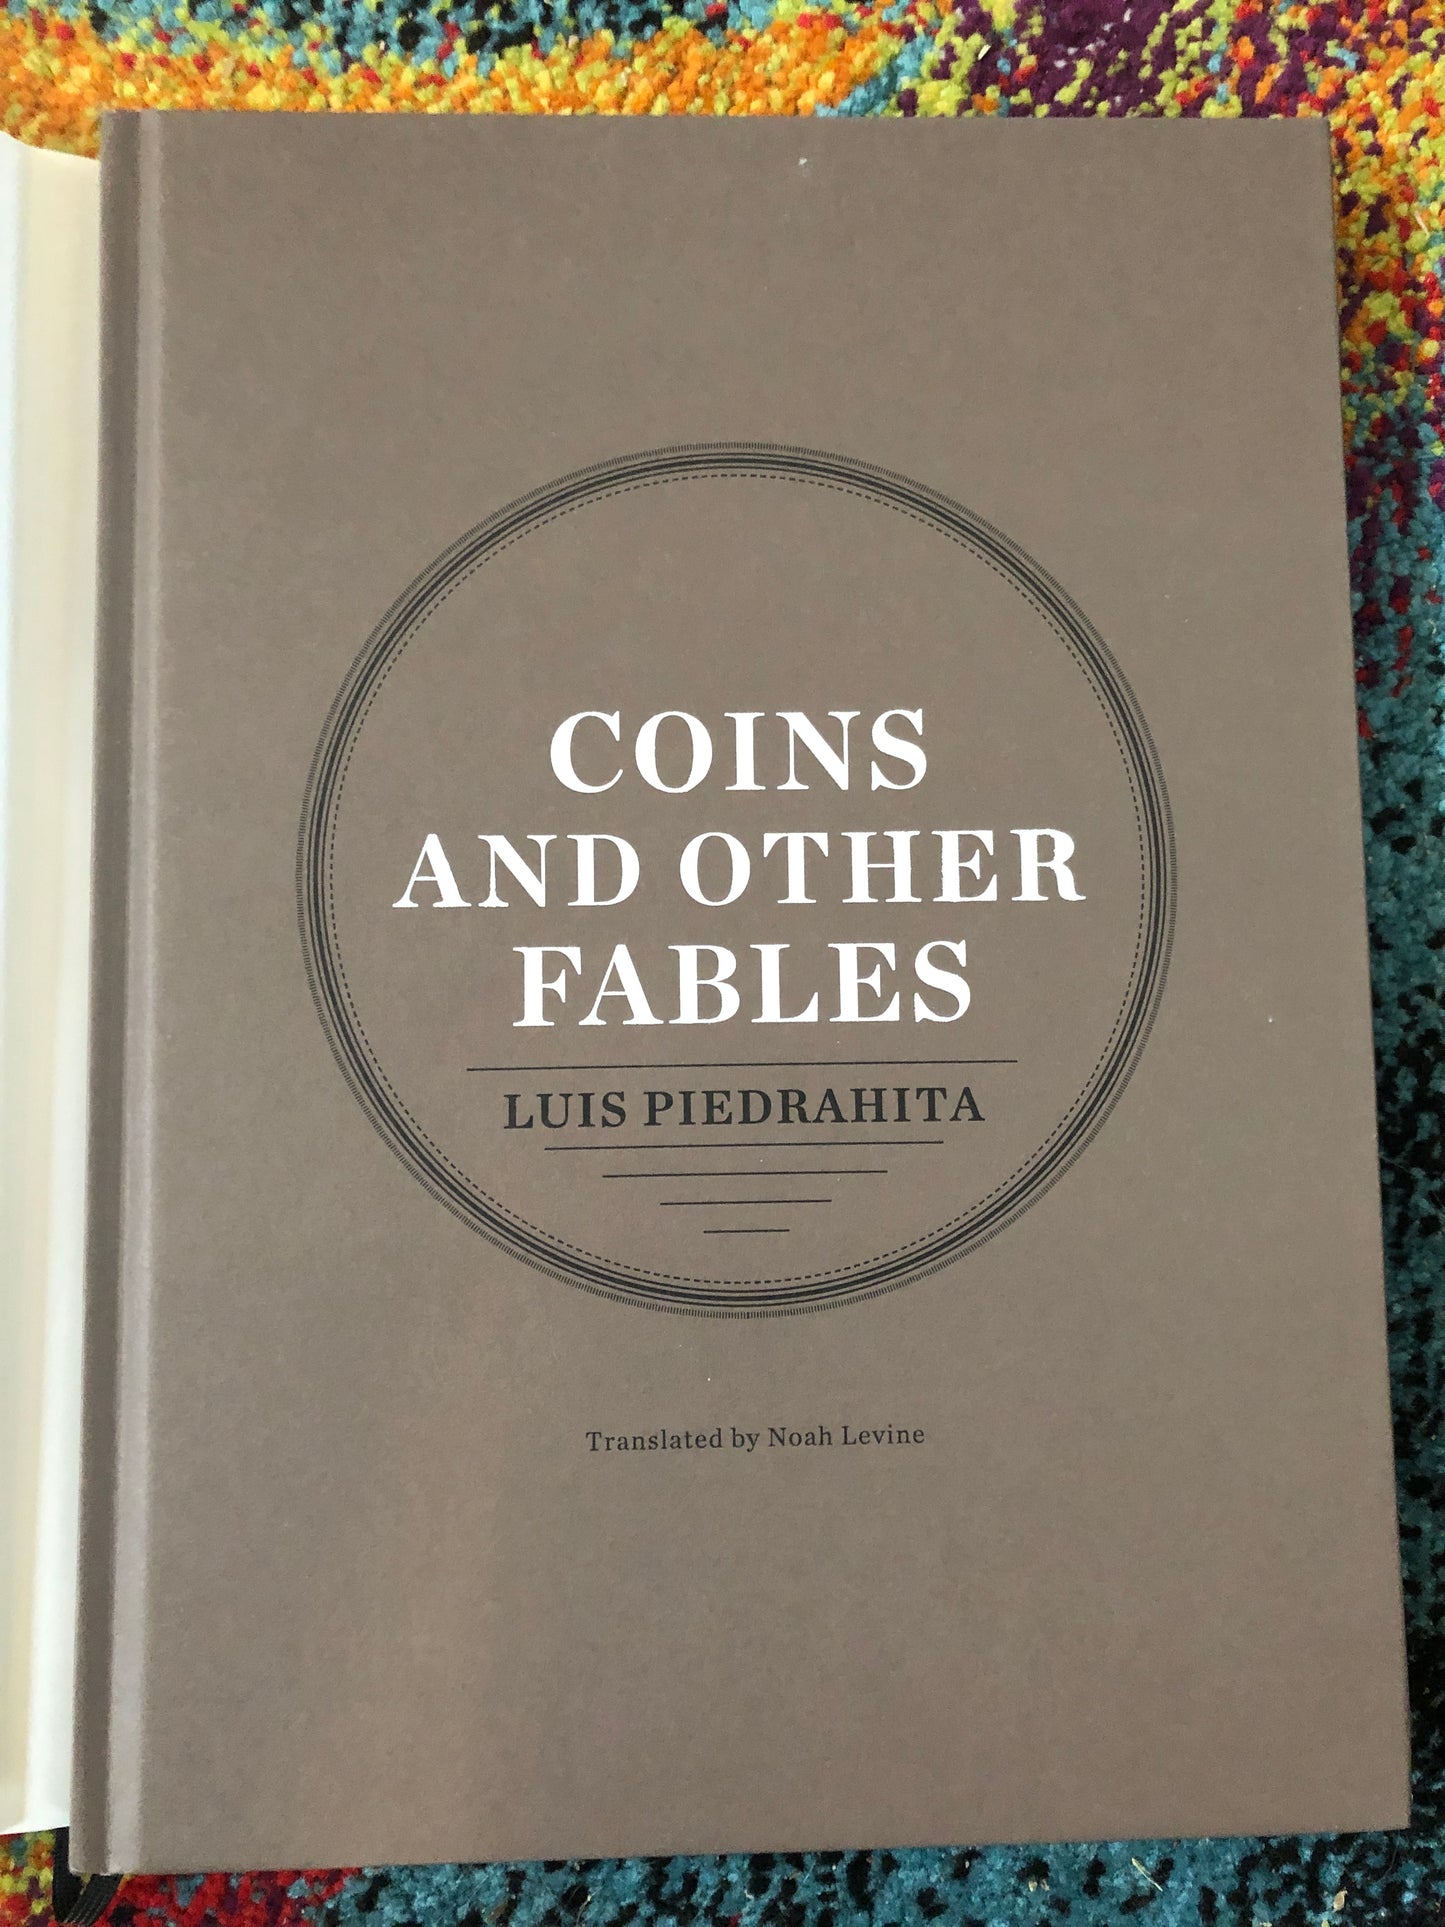 Coins And Other Fables - Luis Piedrahita